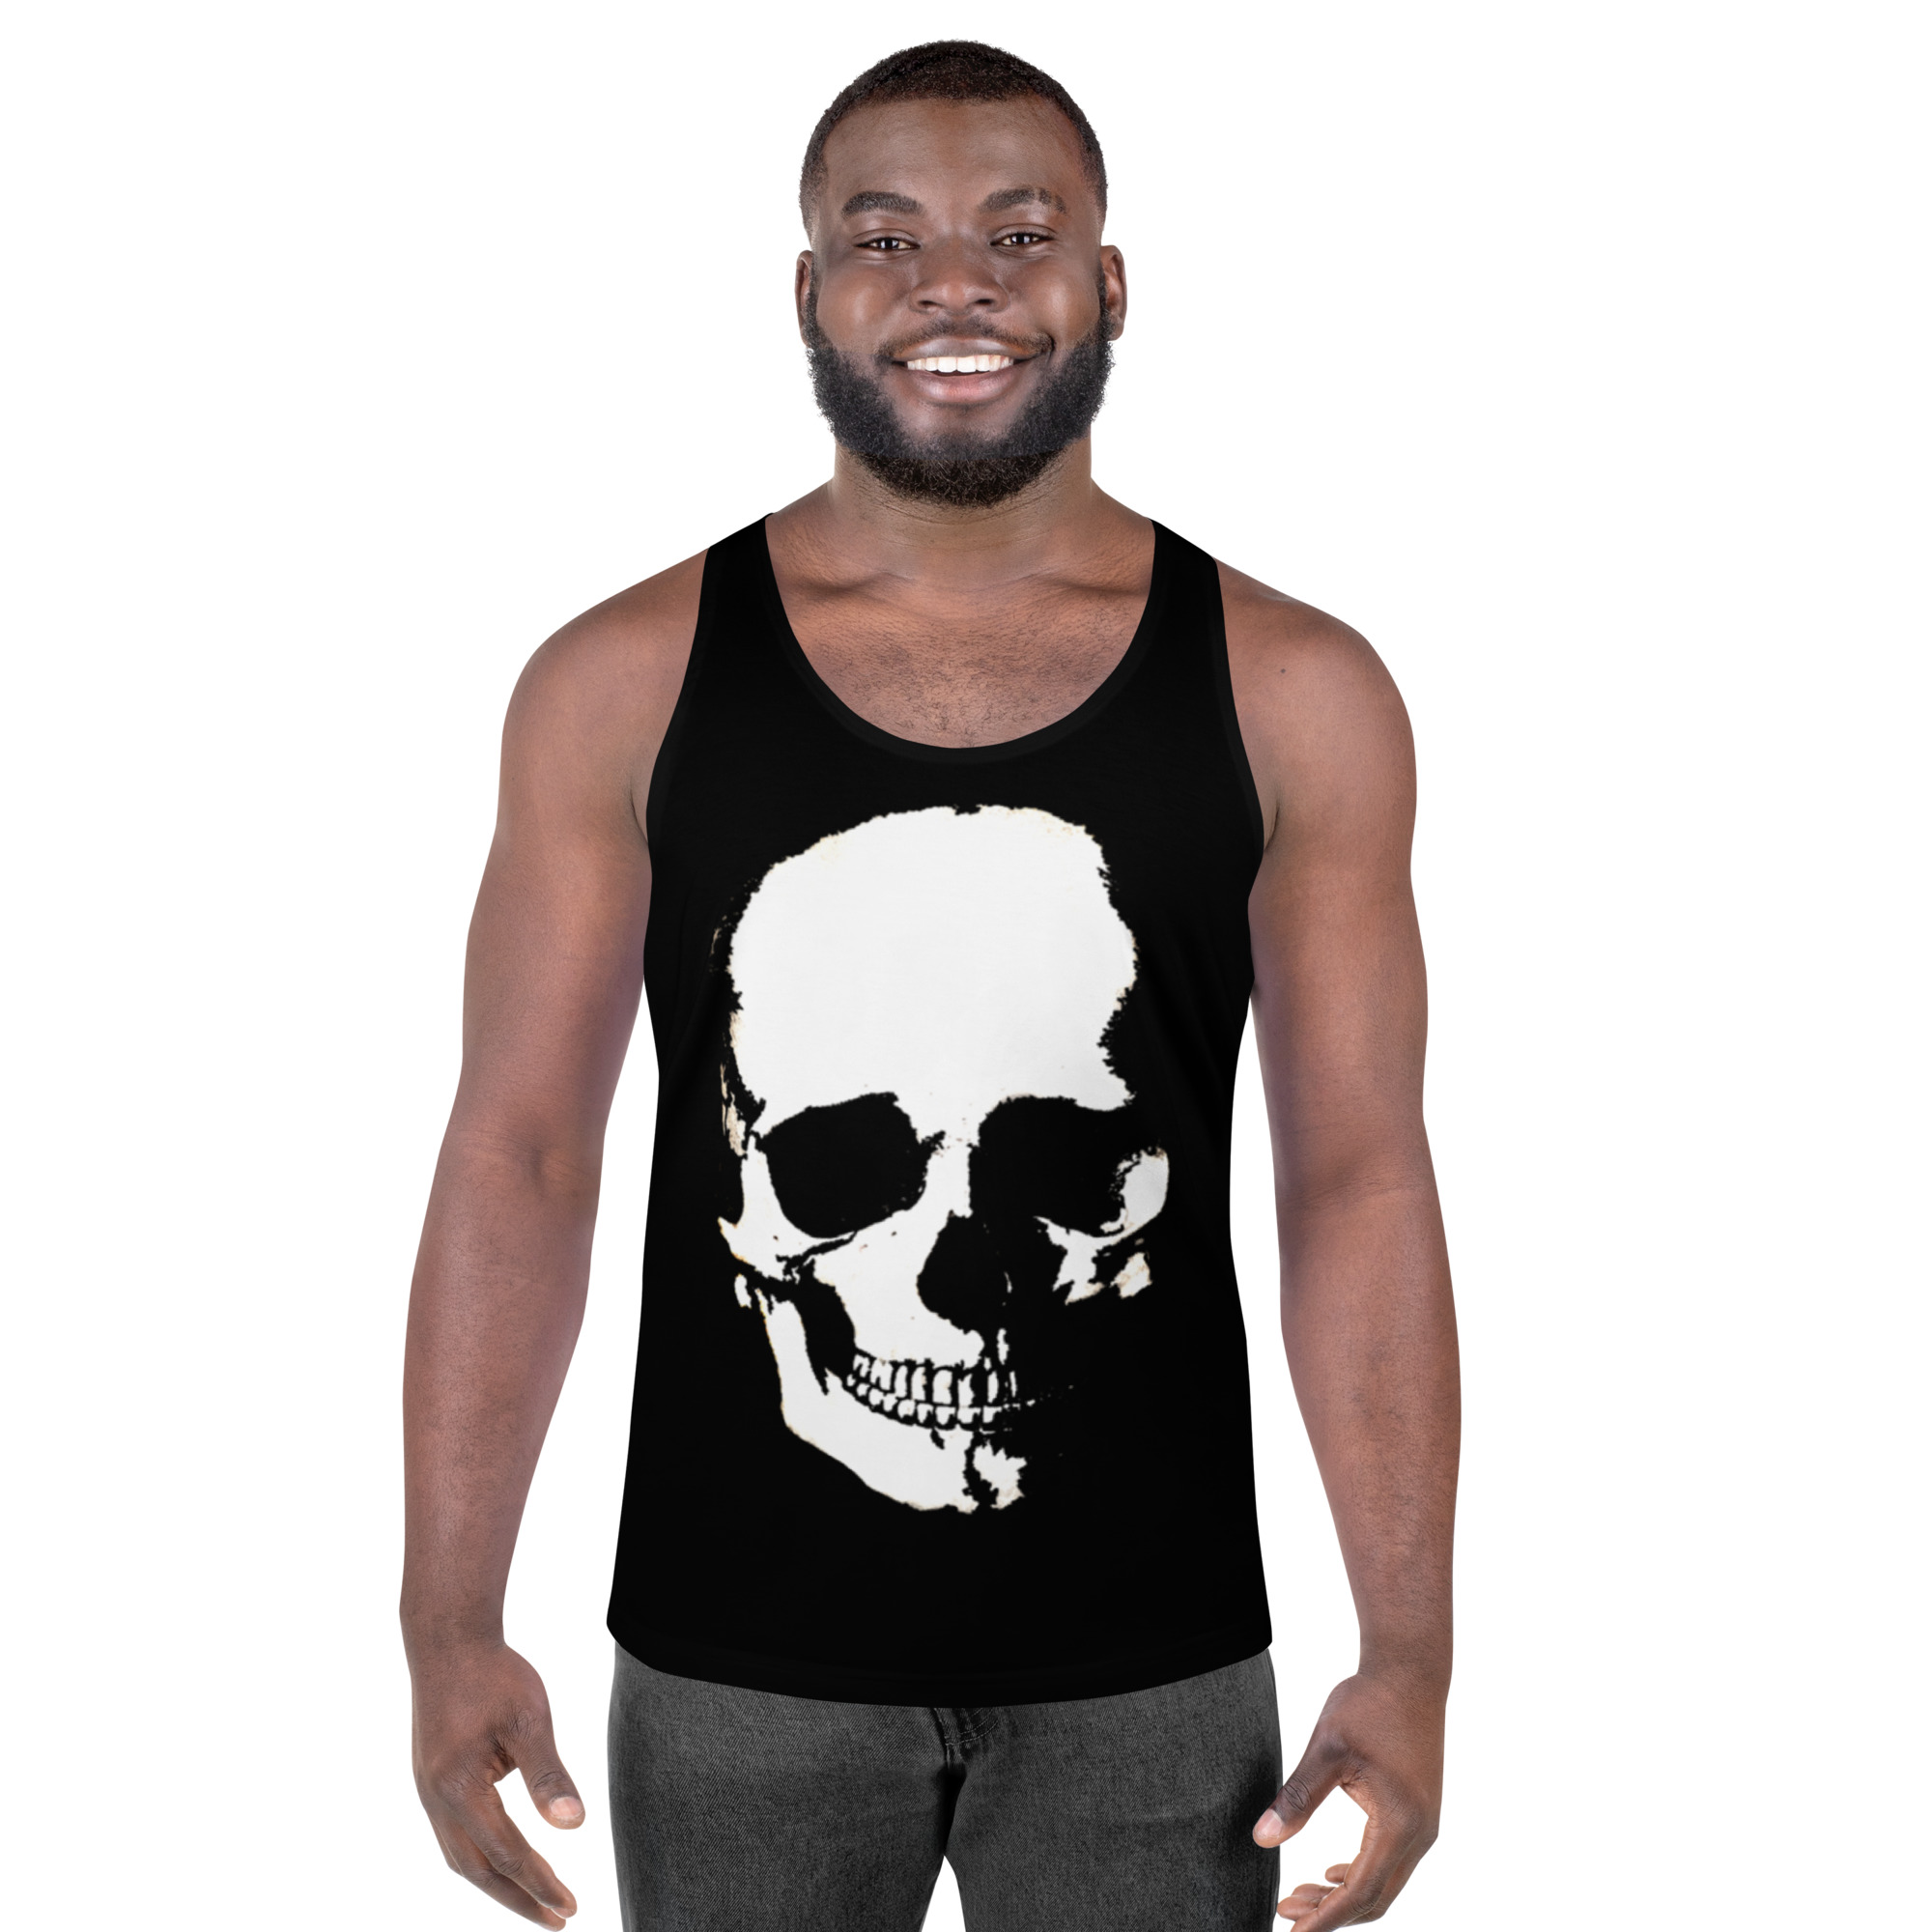 all-over-print-mens-tank-top-white-front-63500a2db533f.jpg